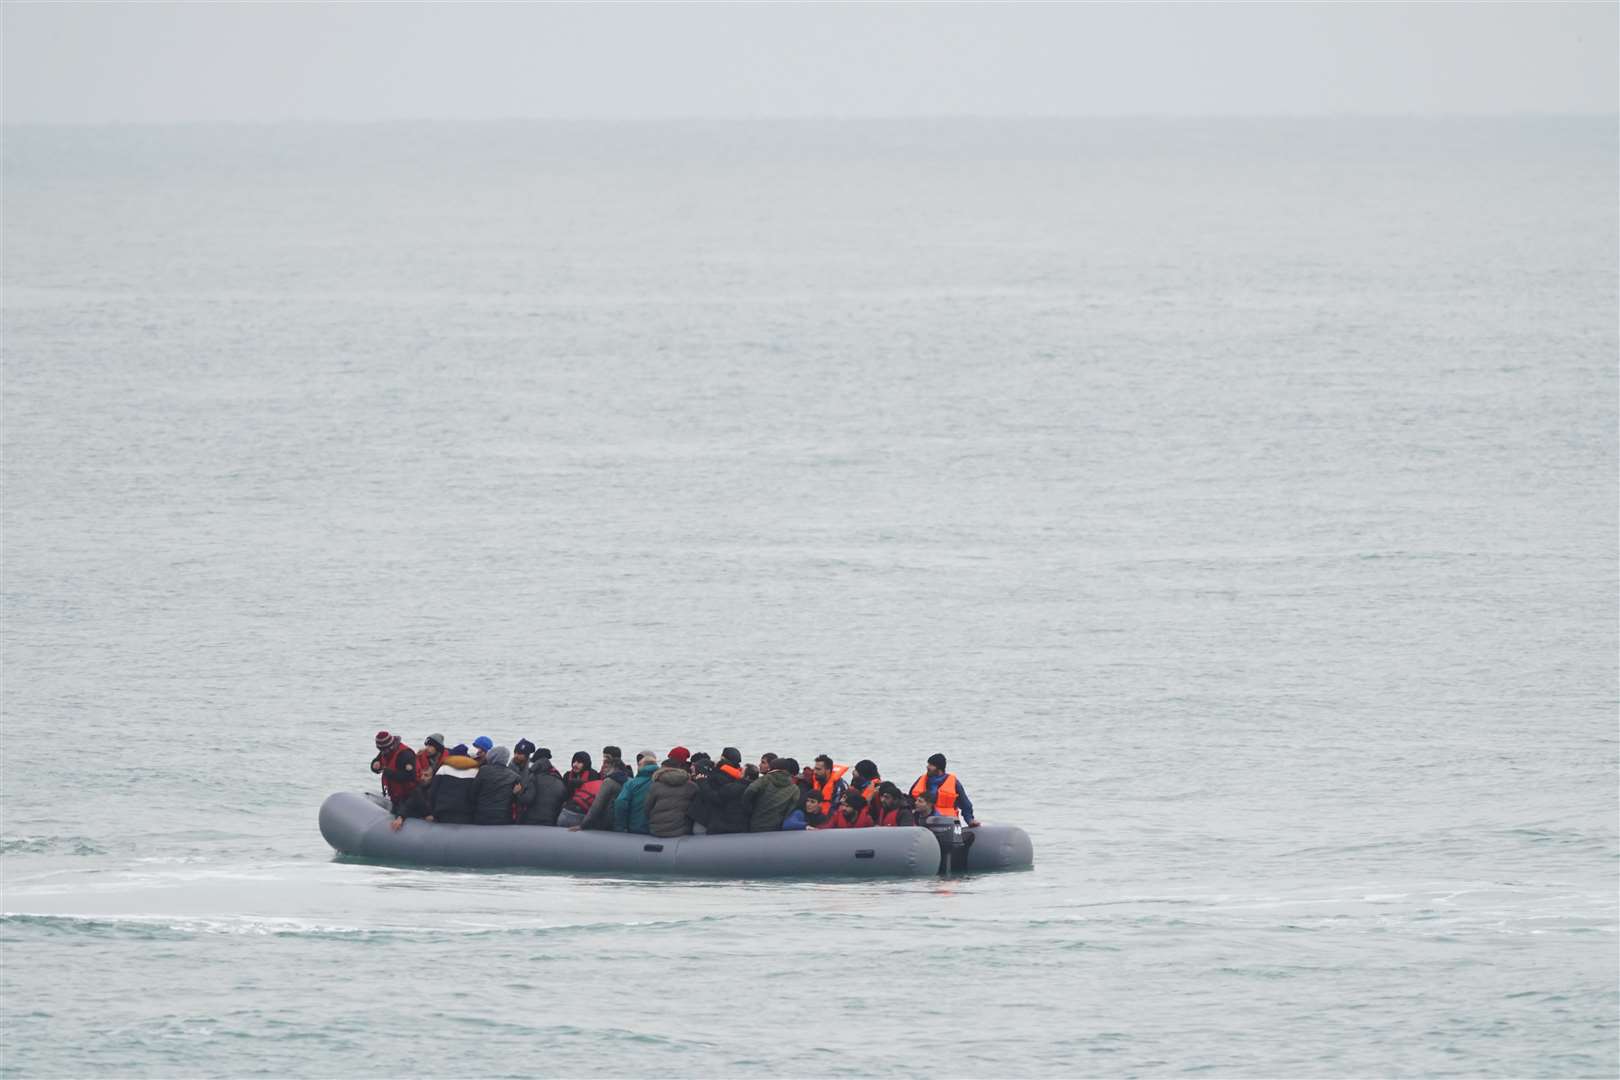 More than 25,700 people have made the dangerous journey to the UK in small boats this year (Gareth Fuller/PA)